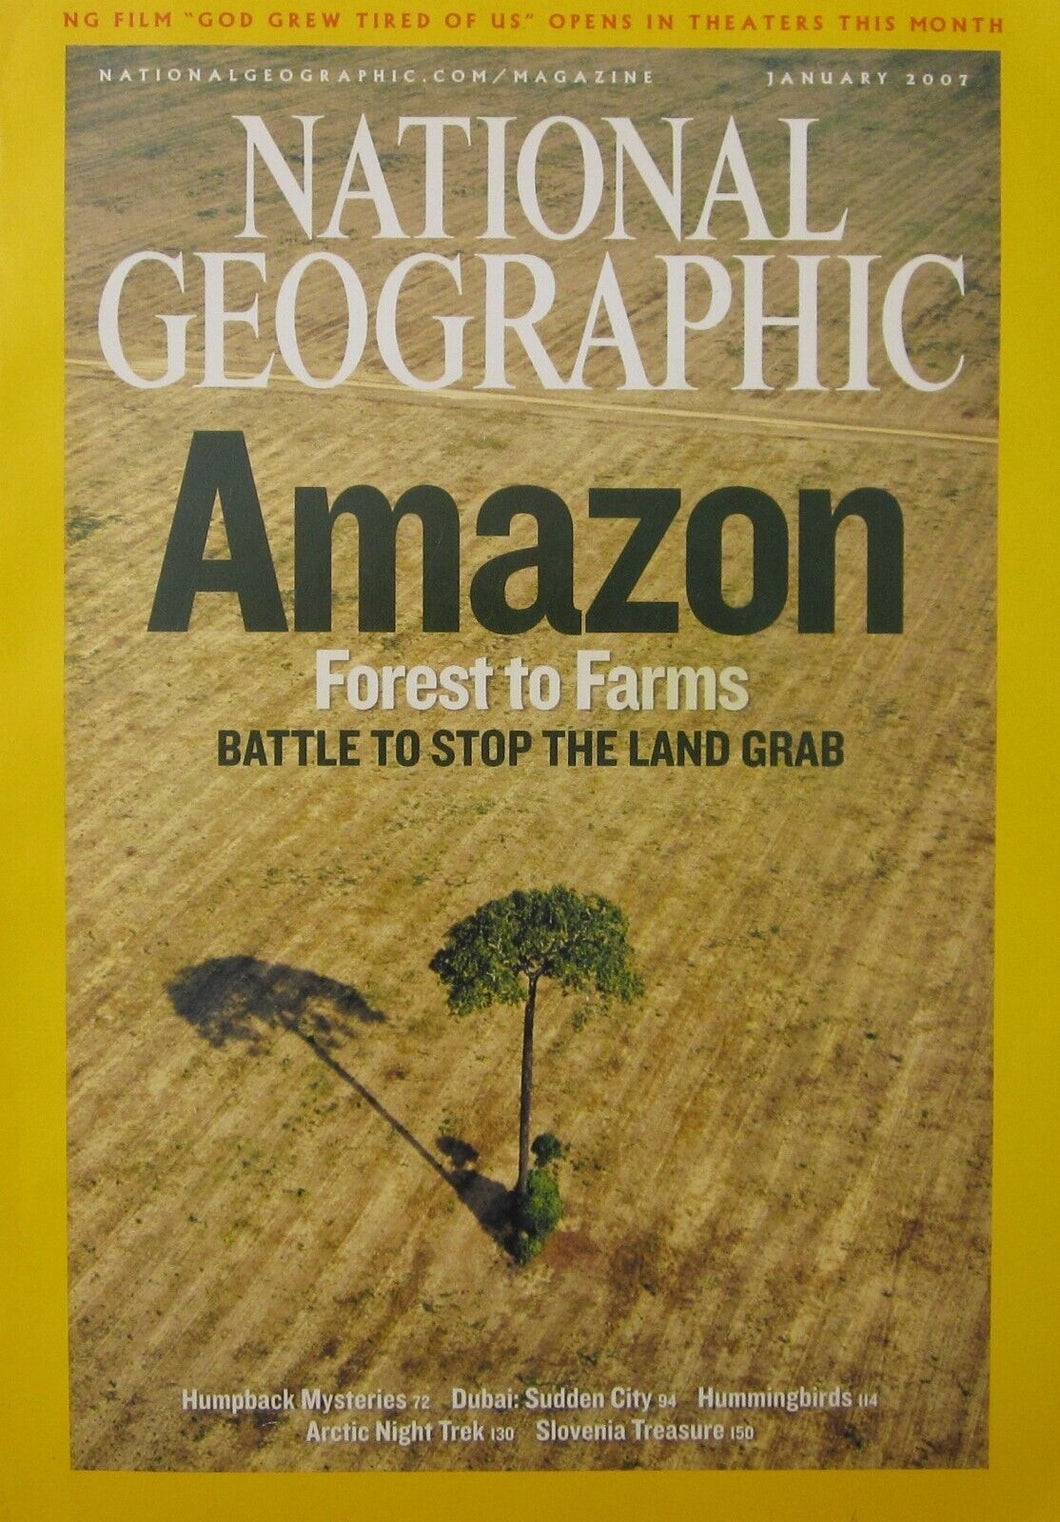 Amazon forests to farms [national geographic magazine] [rare books]